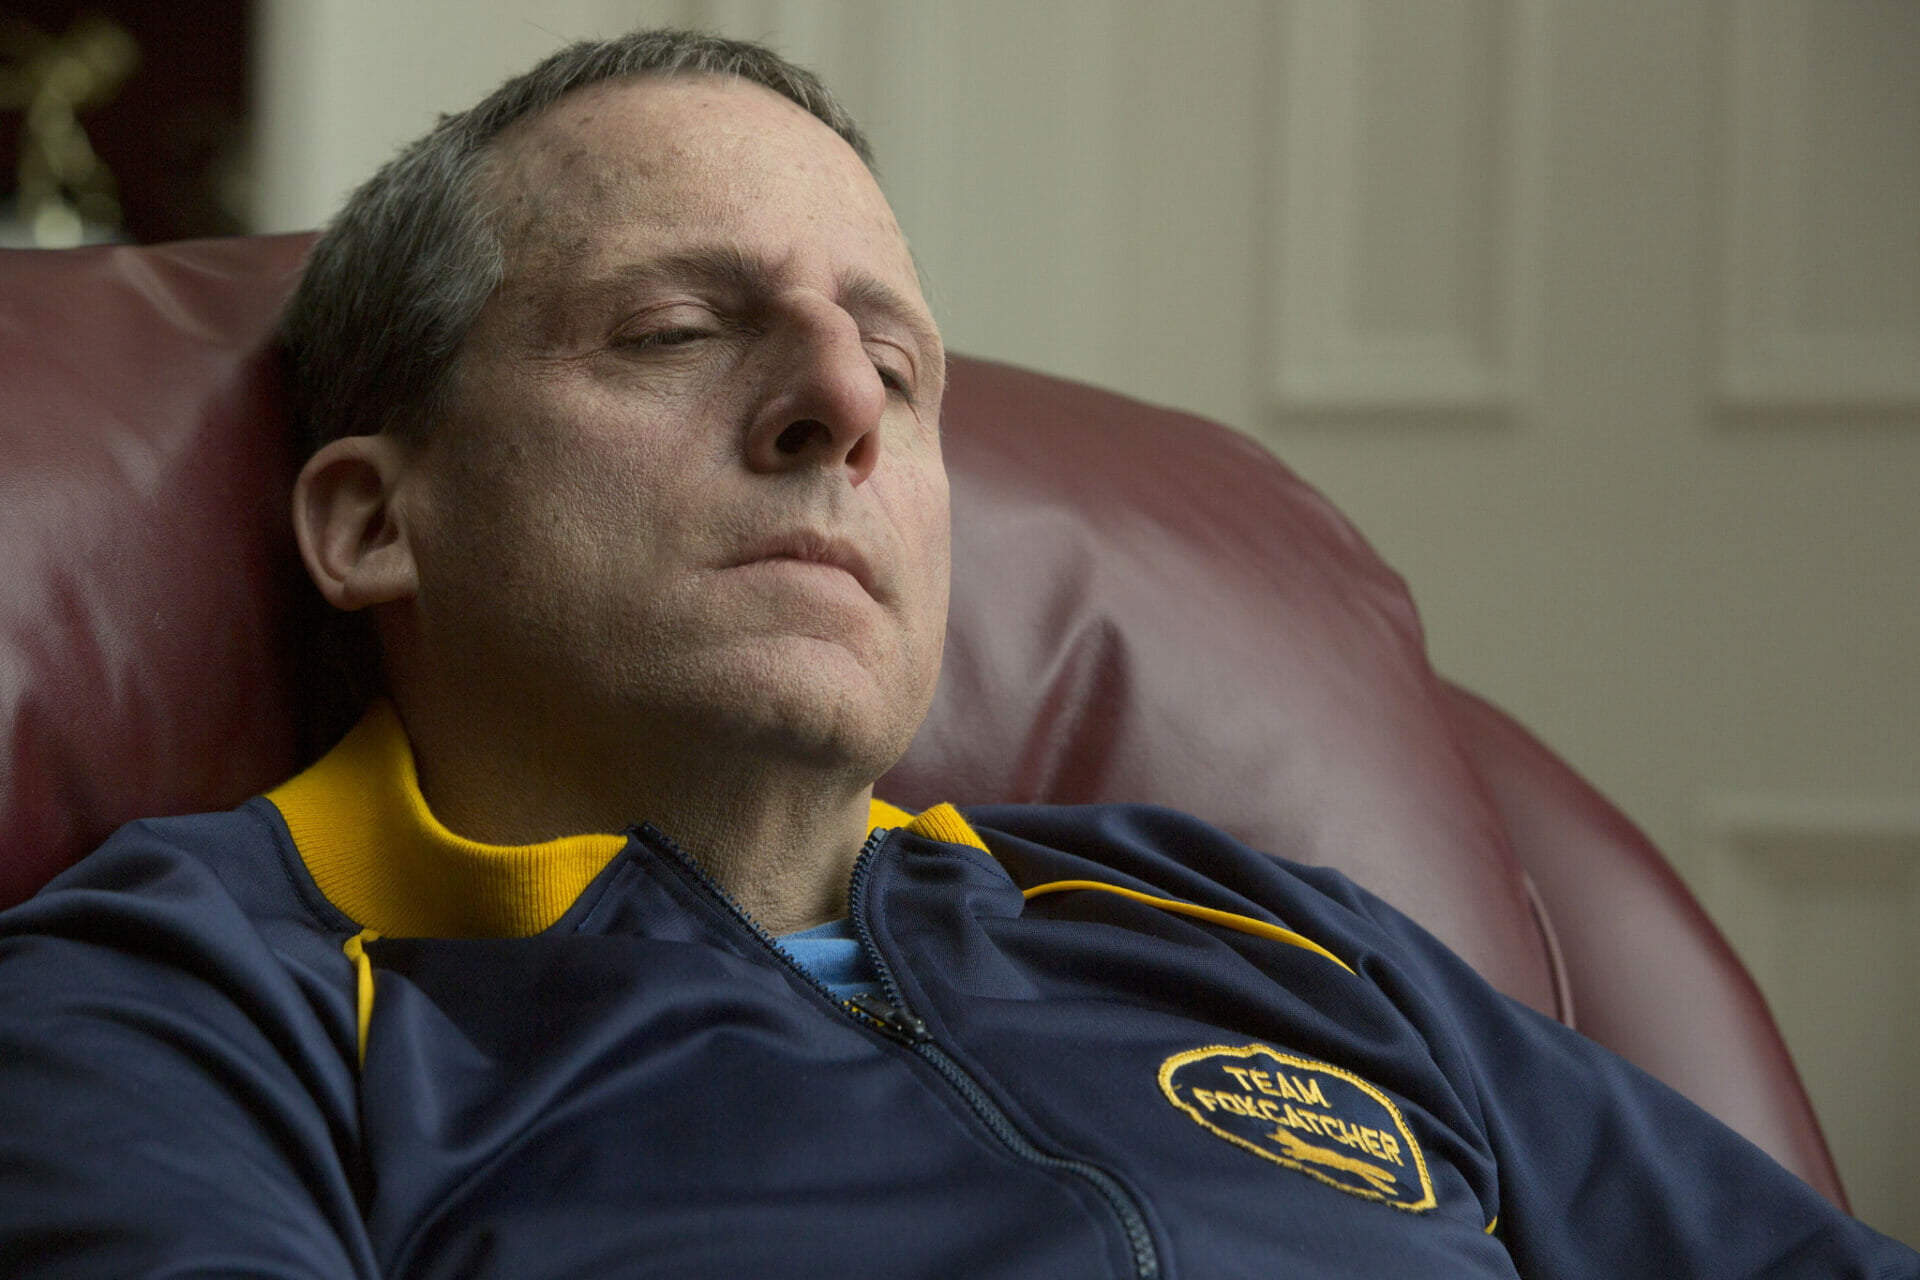 Steve Carell Movies And Tv Shows: Foxcatcher (2014)